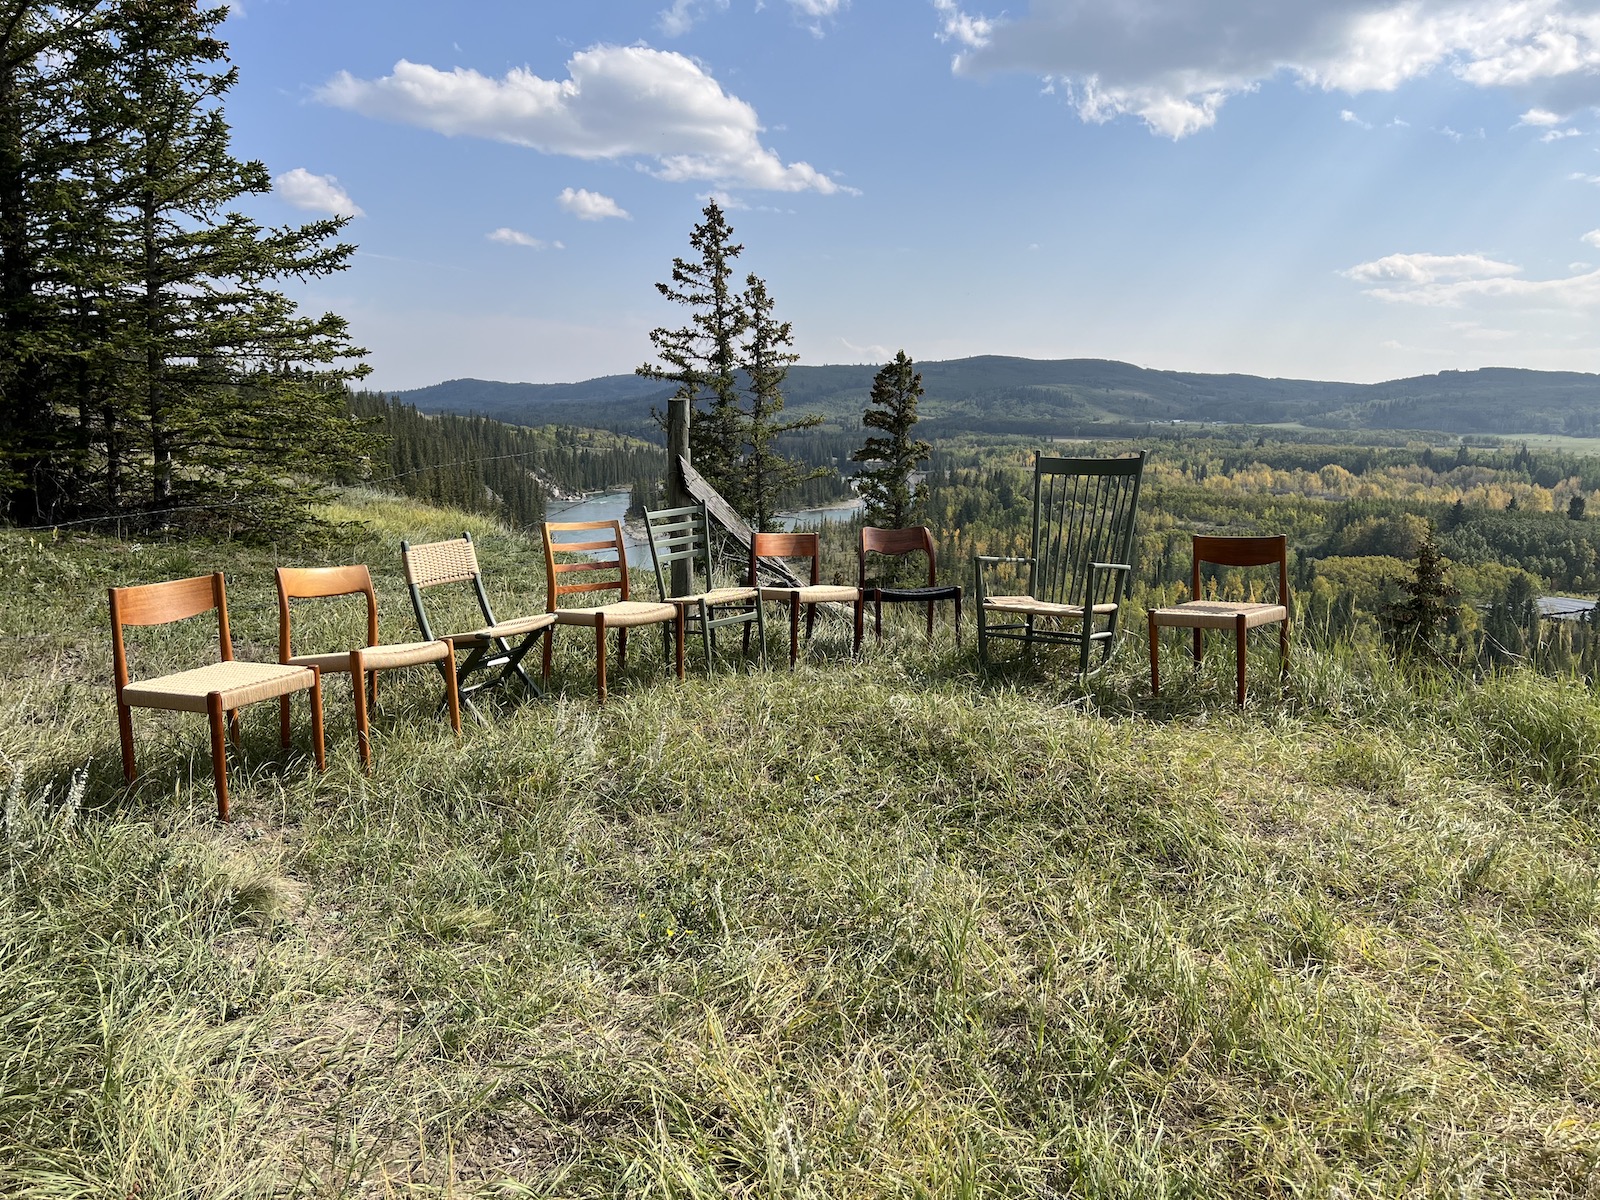 A row of mid-century modern chairs in front of a beautiful grassy landscape with a river in the back.